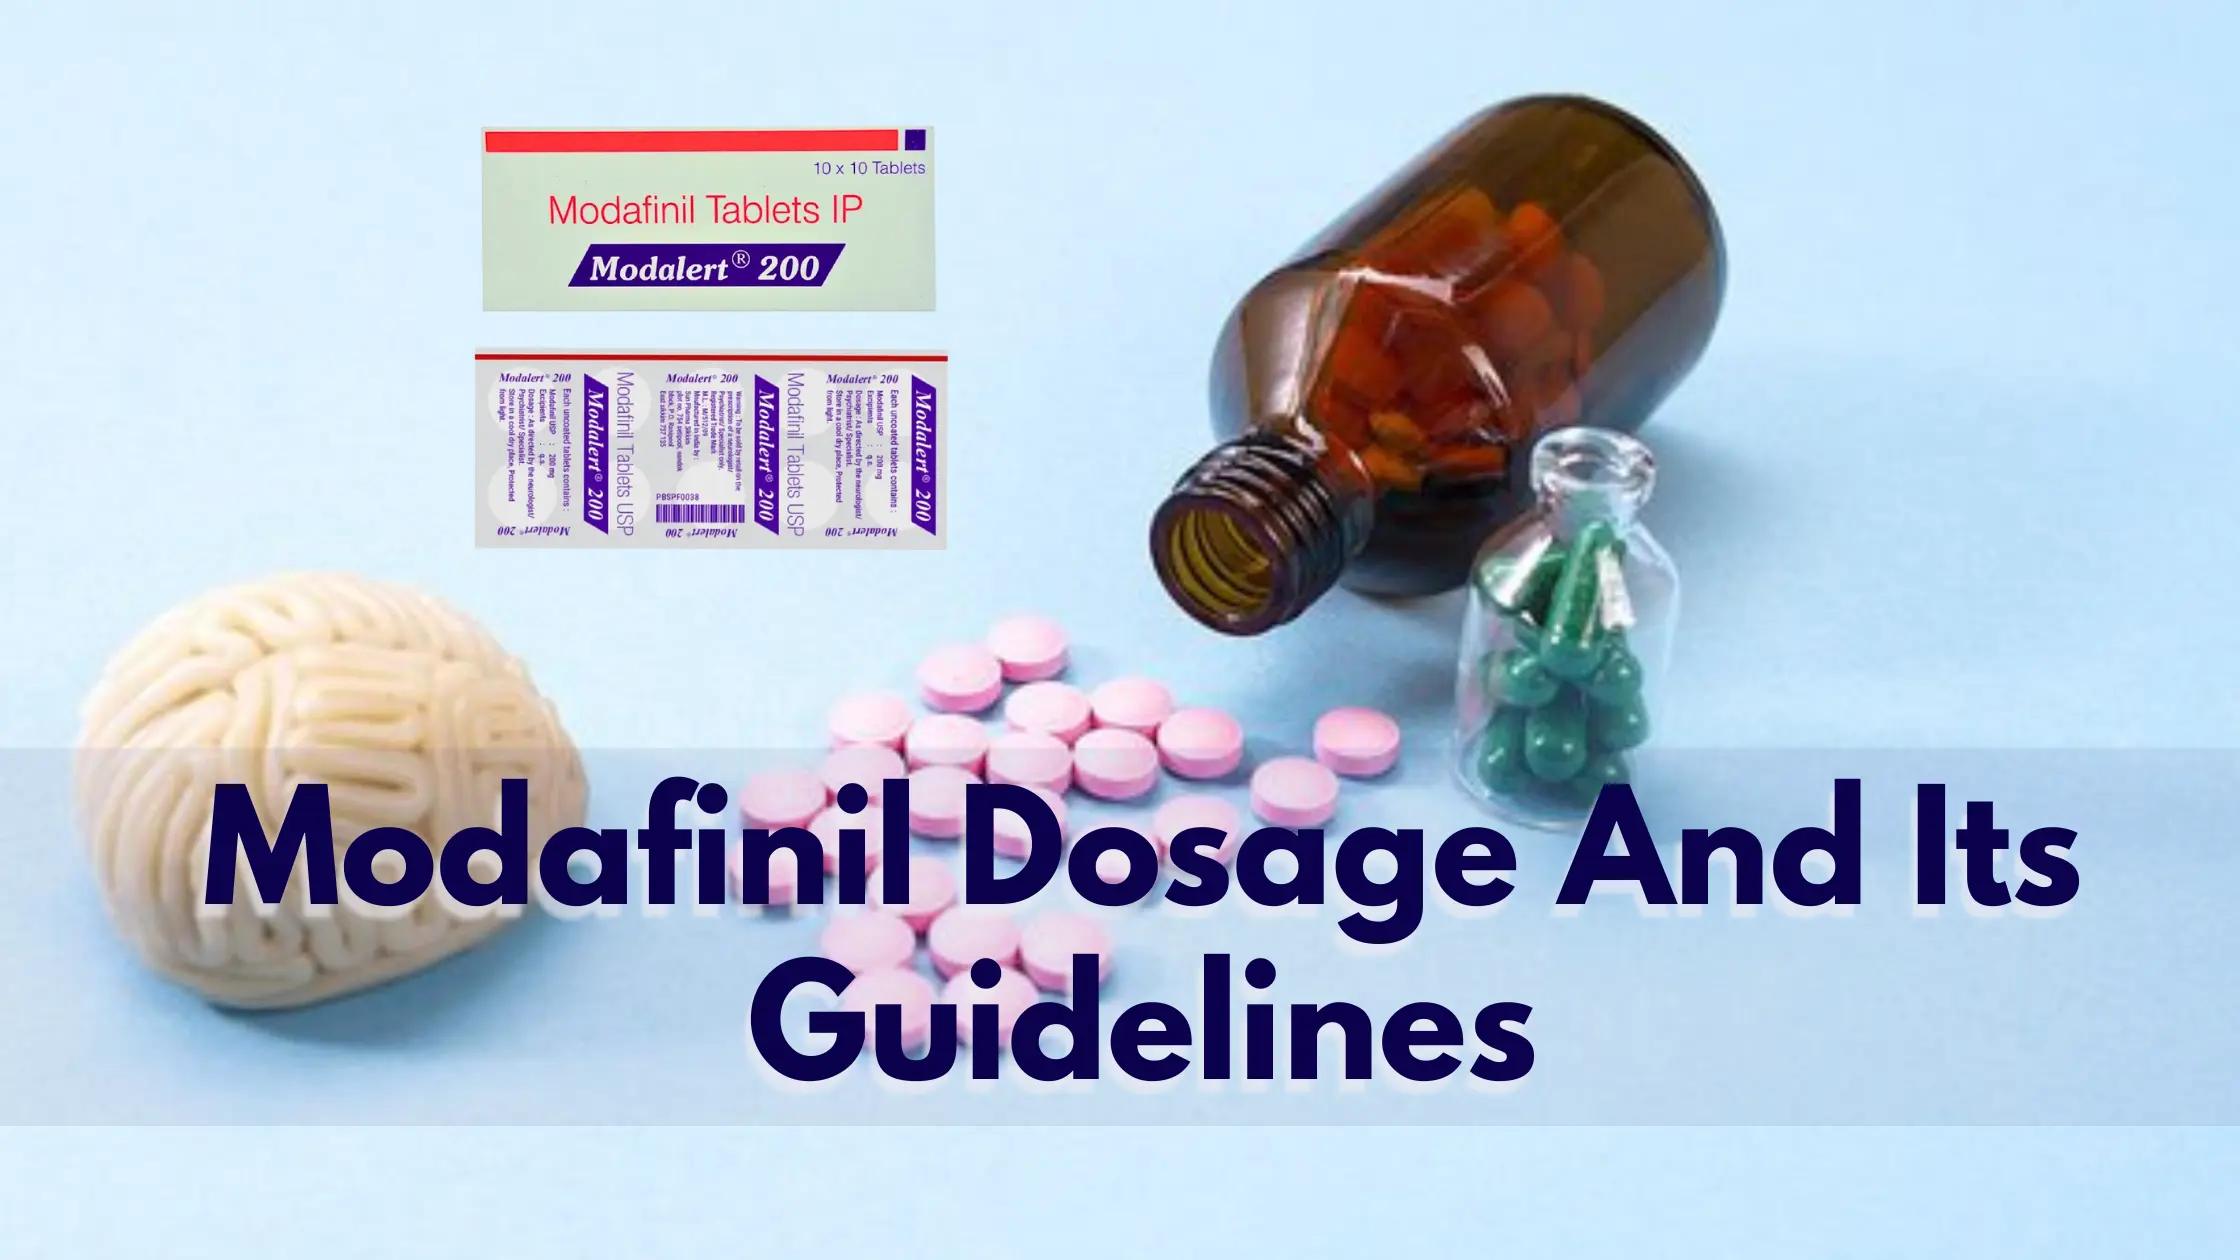 modafinil-dosage-and-its-guidelines